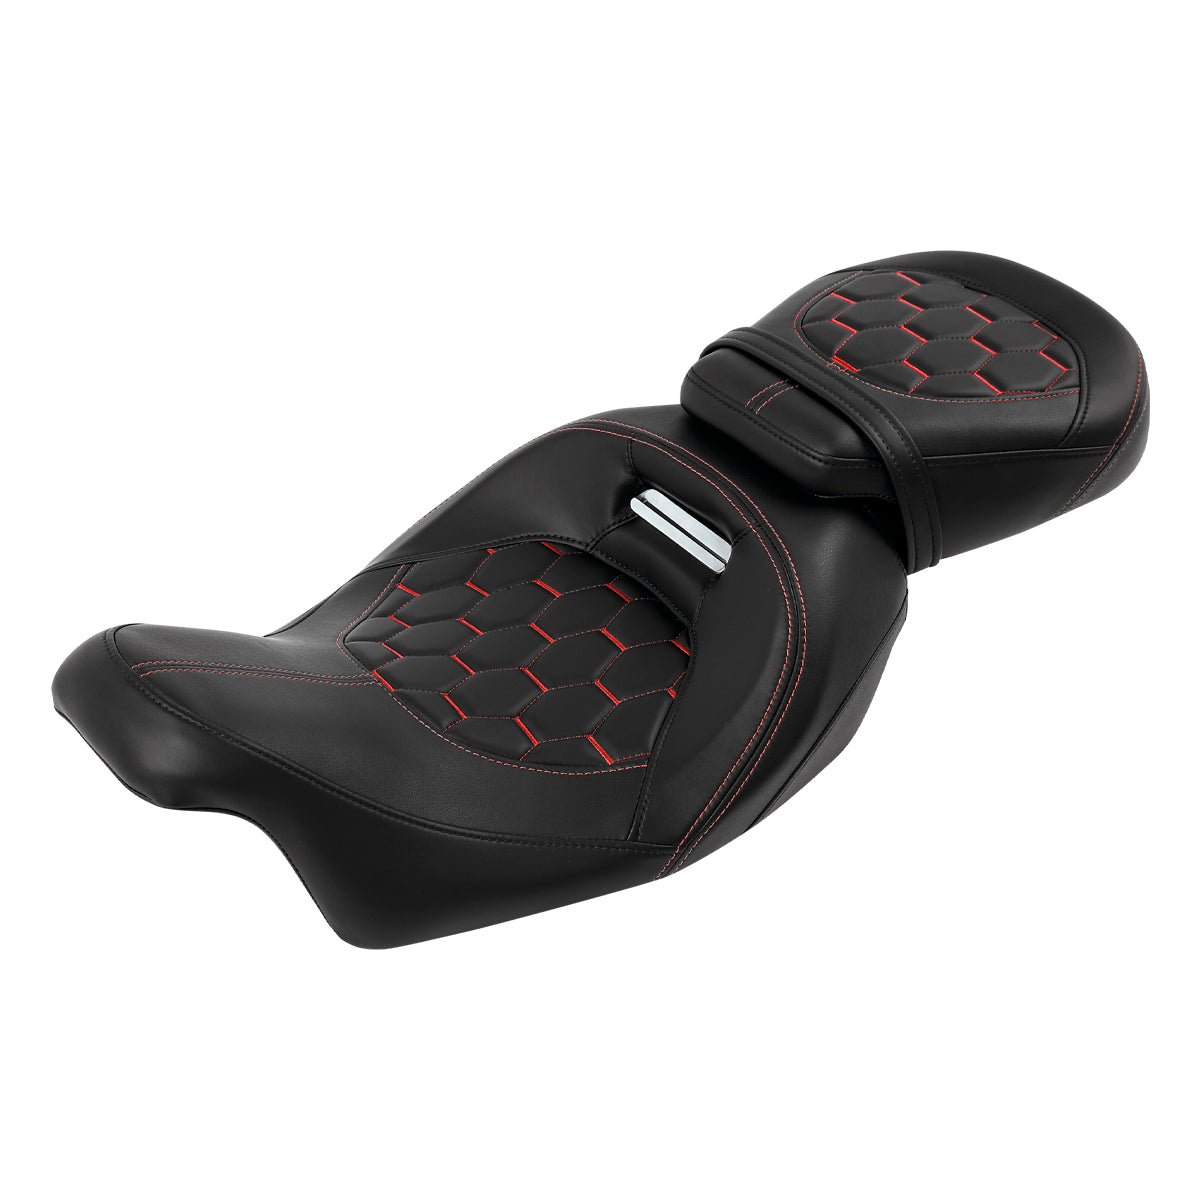 C.C. RIDER Touring Seat Two Piece 2 Up Seat Low Profile Driver